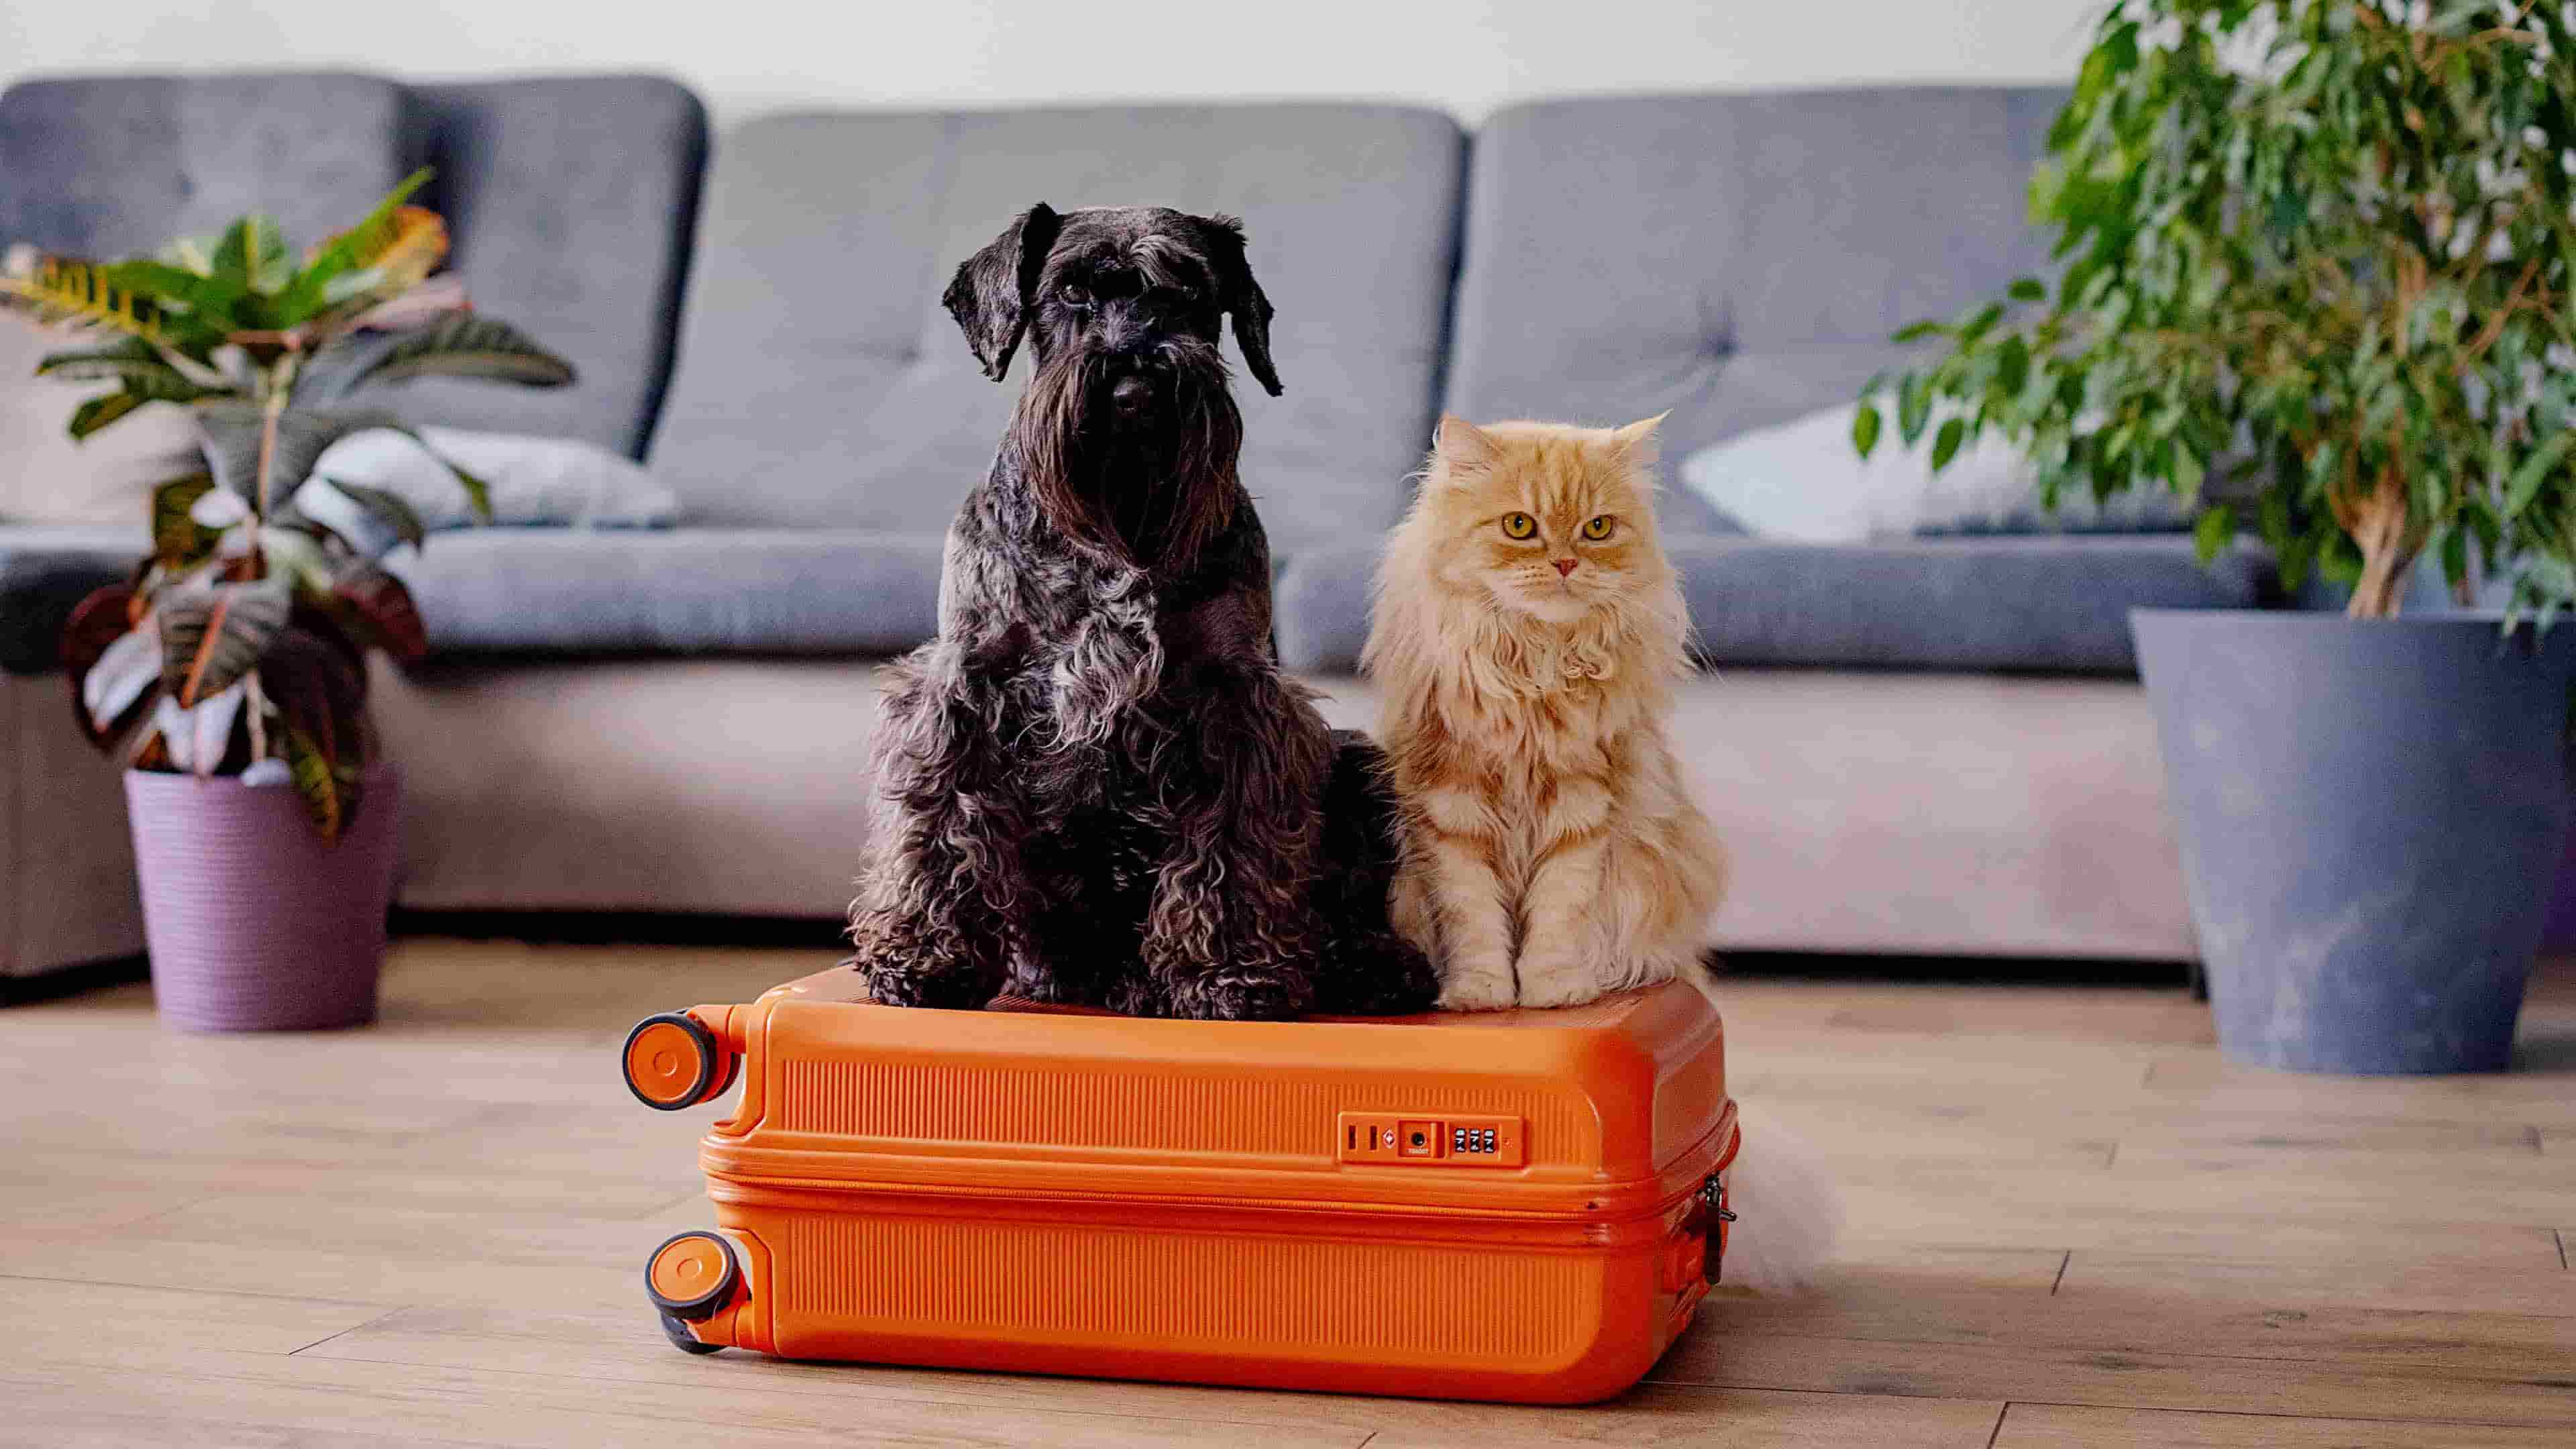 A cat and a dog sitting on a suitcase